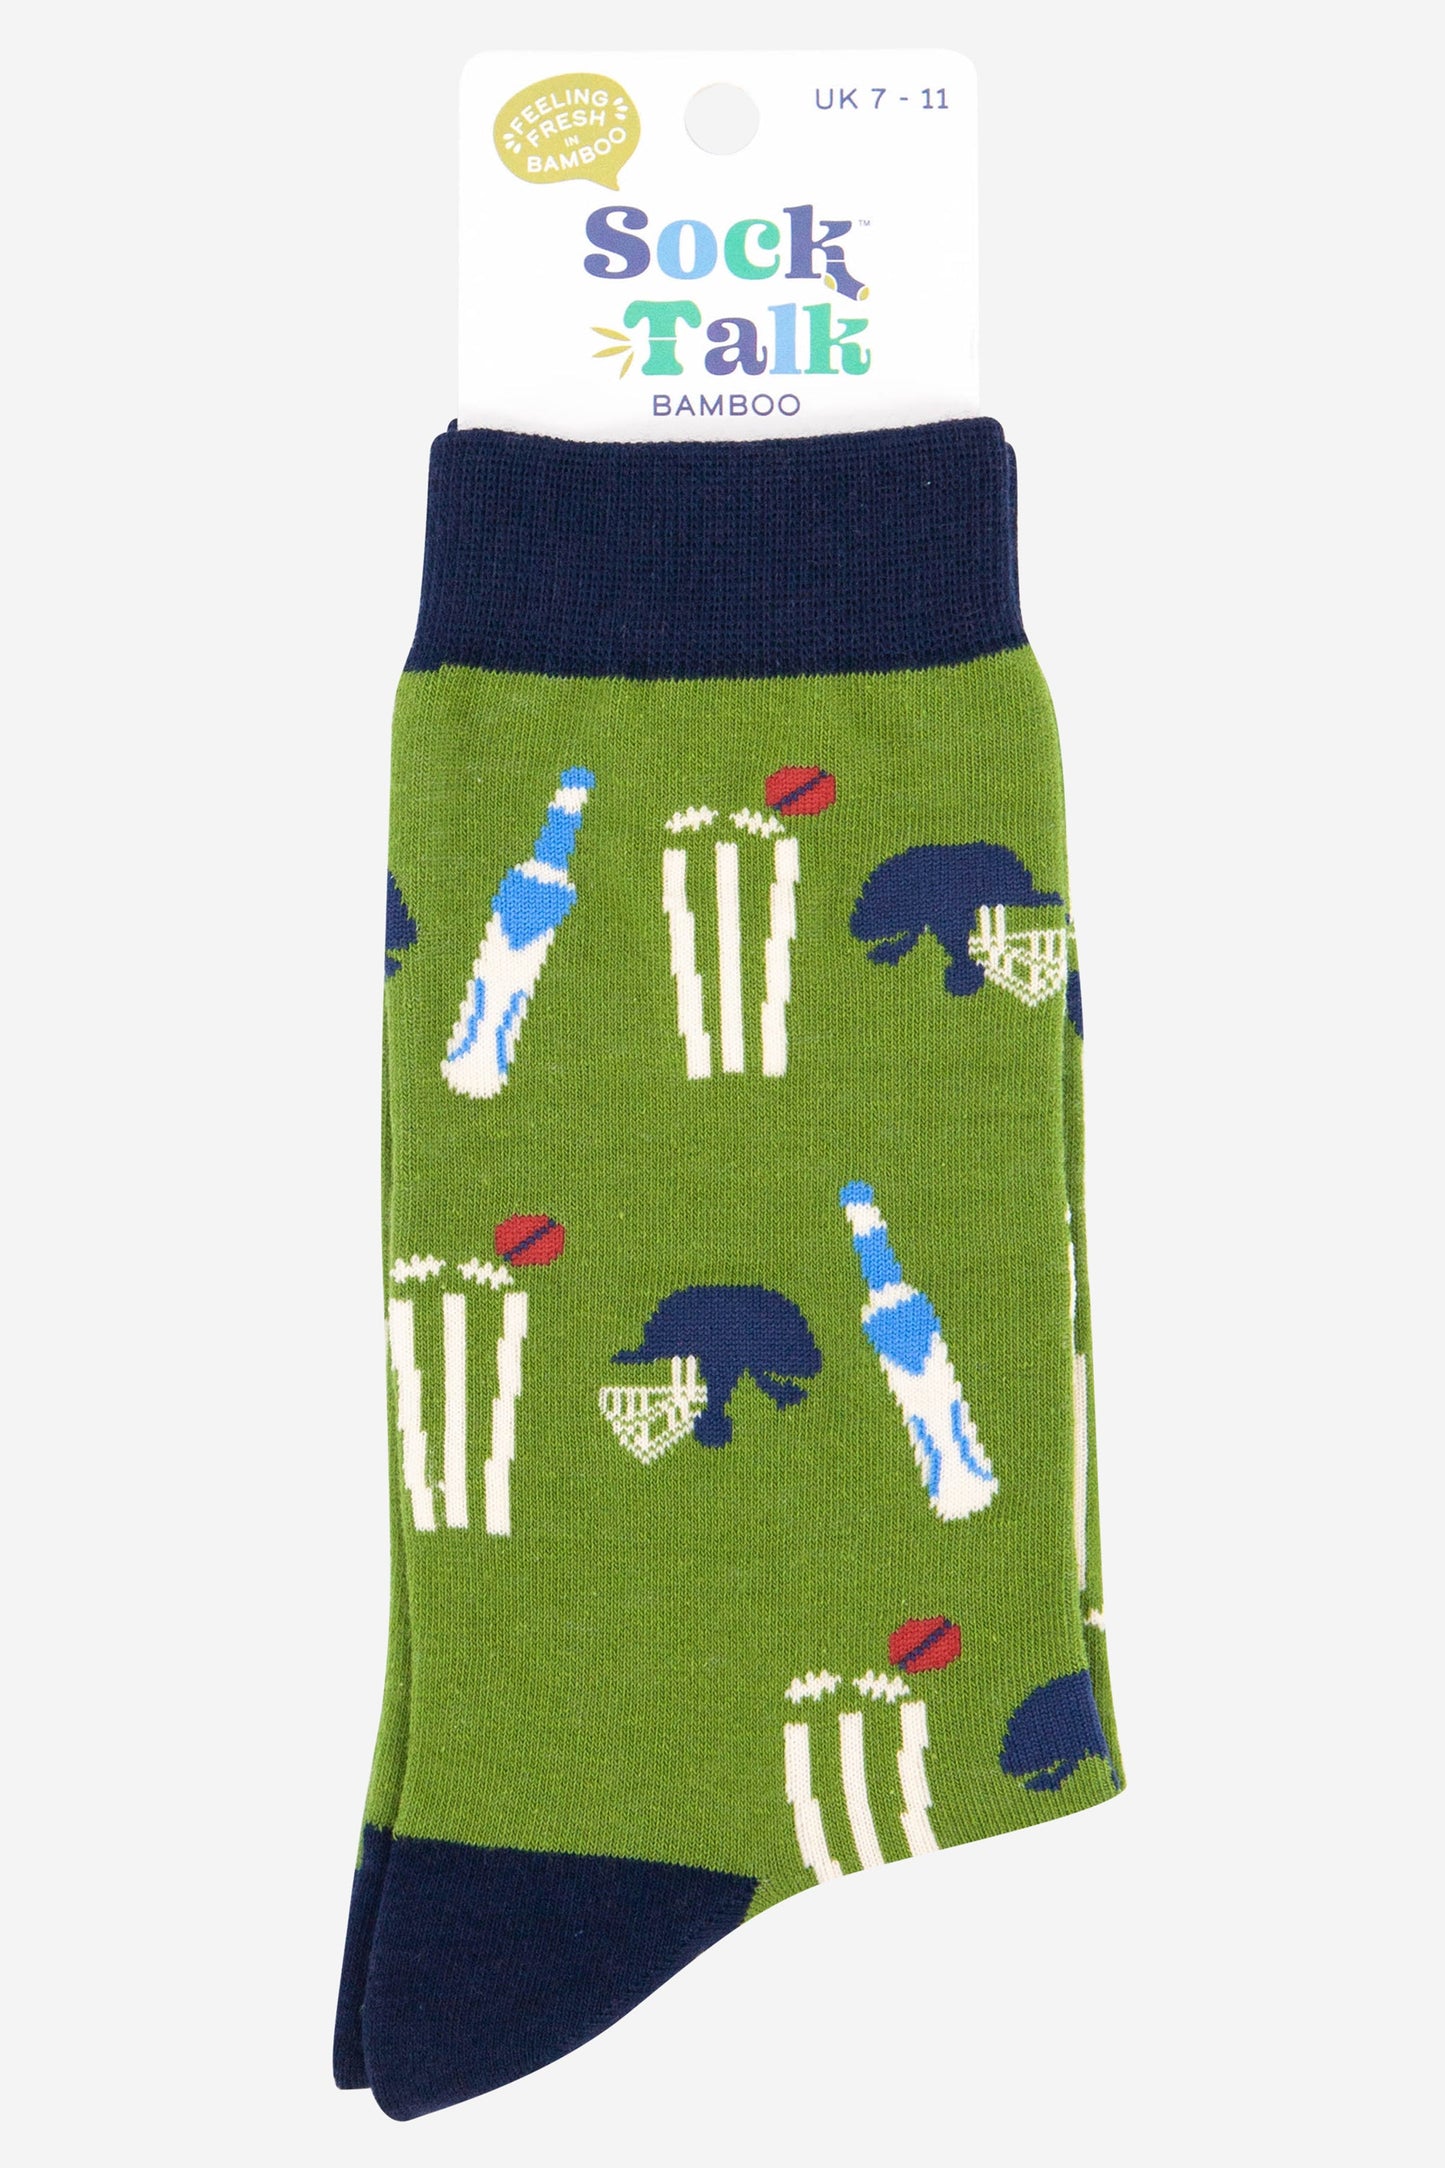 mens cricket socks in green and navy blue uk size 7-11